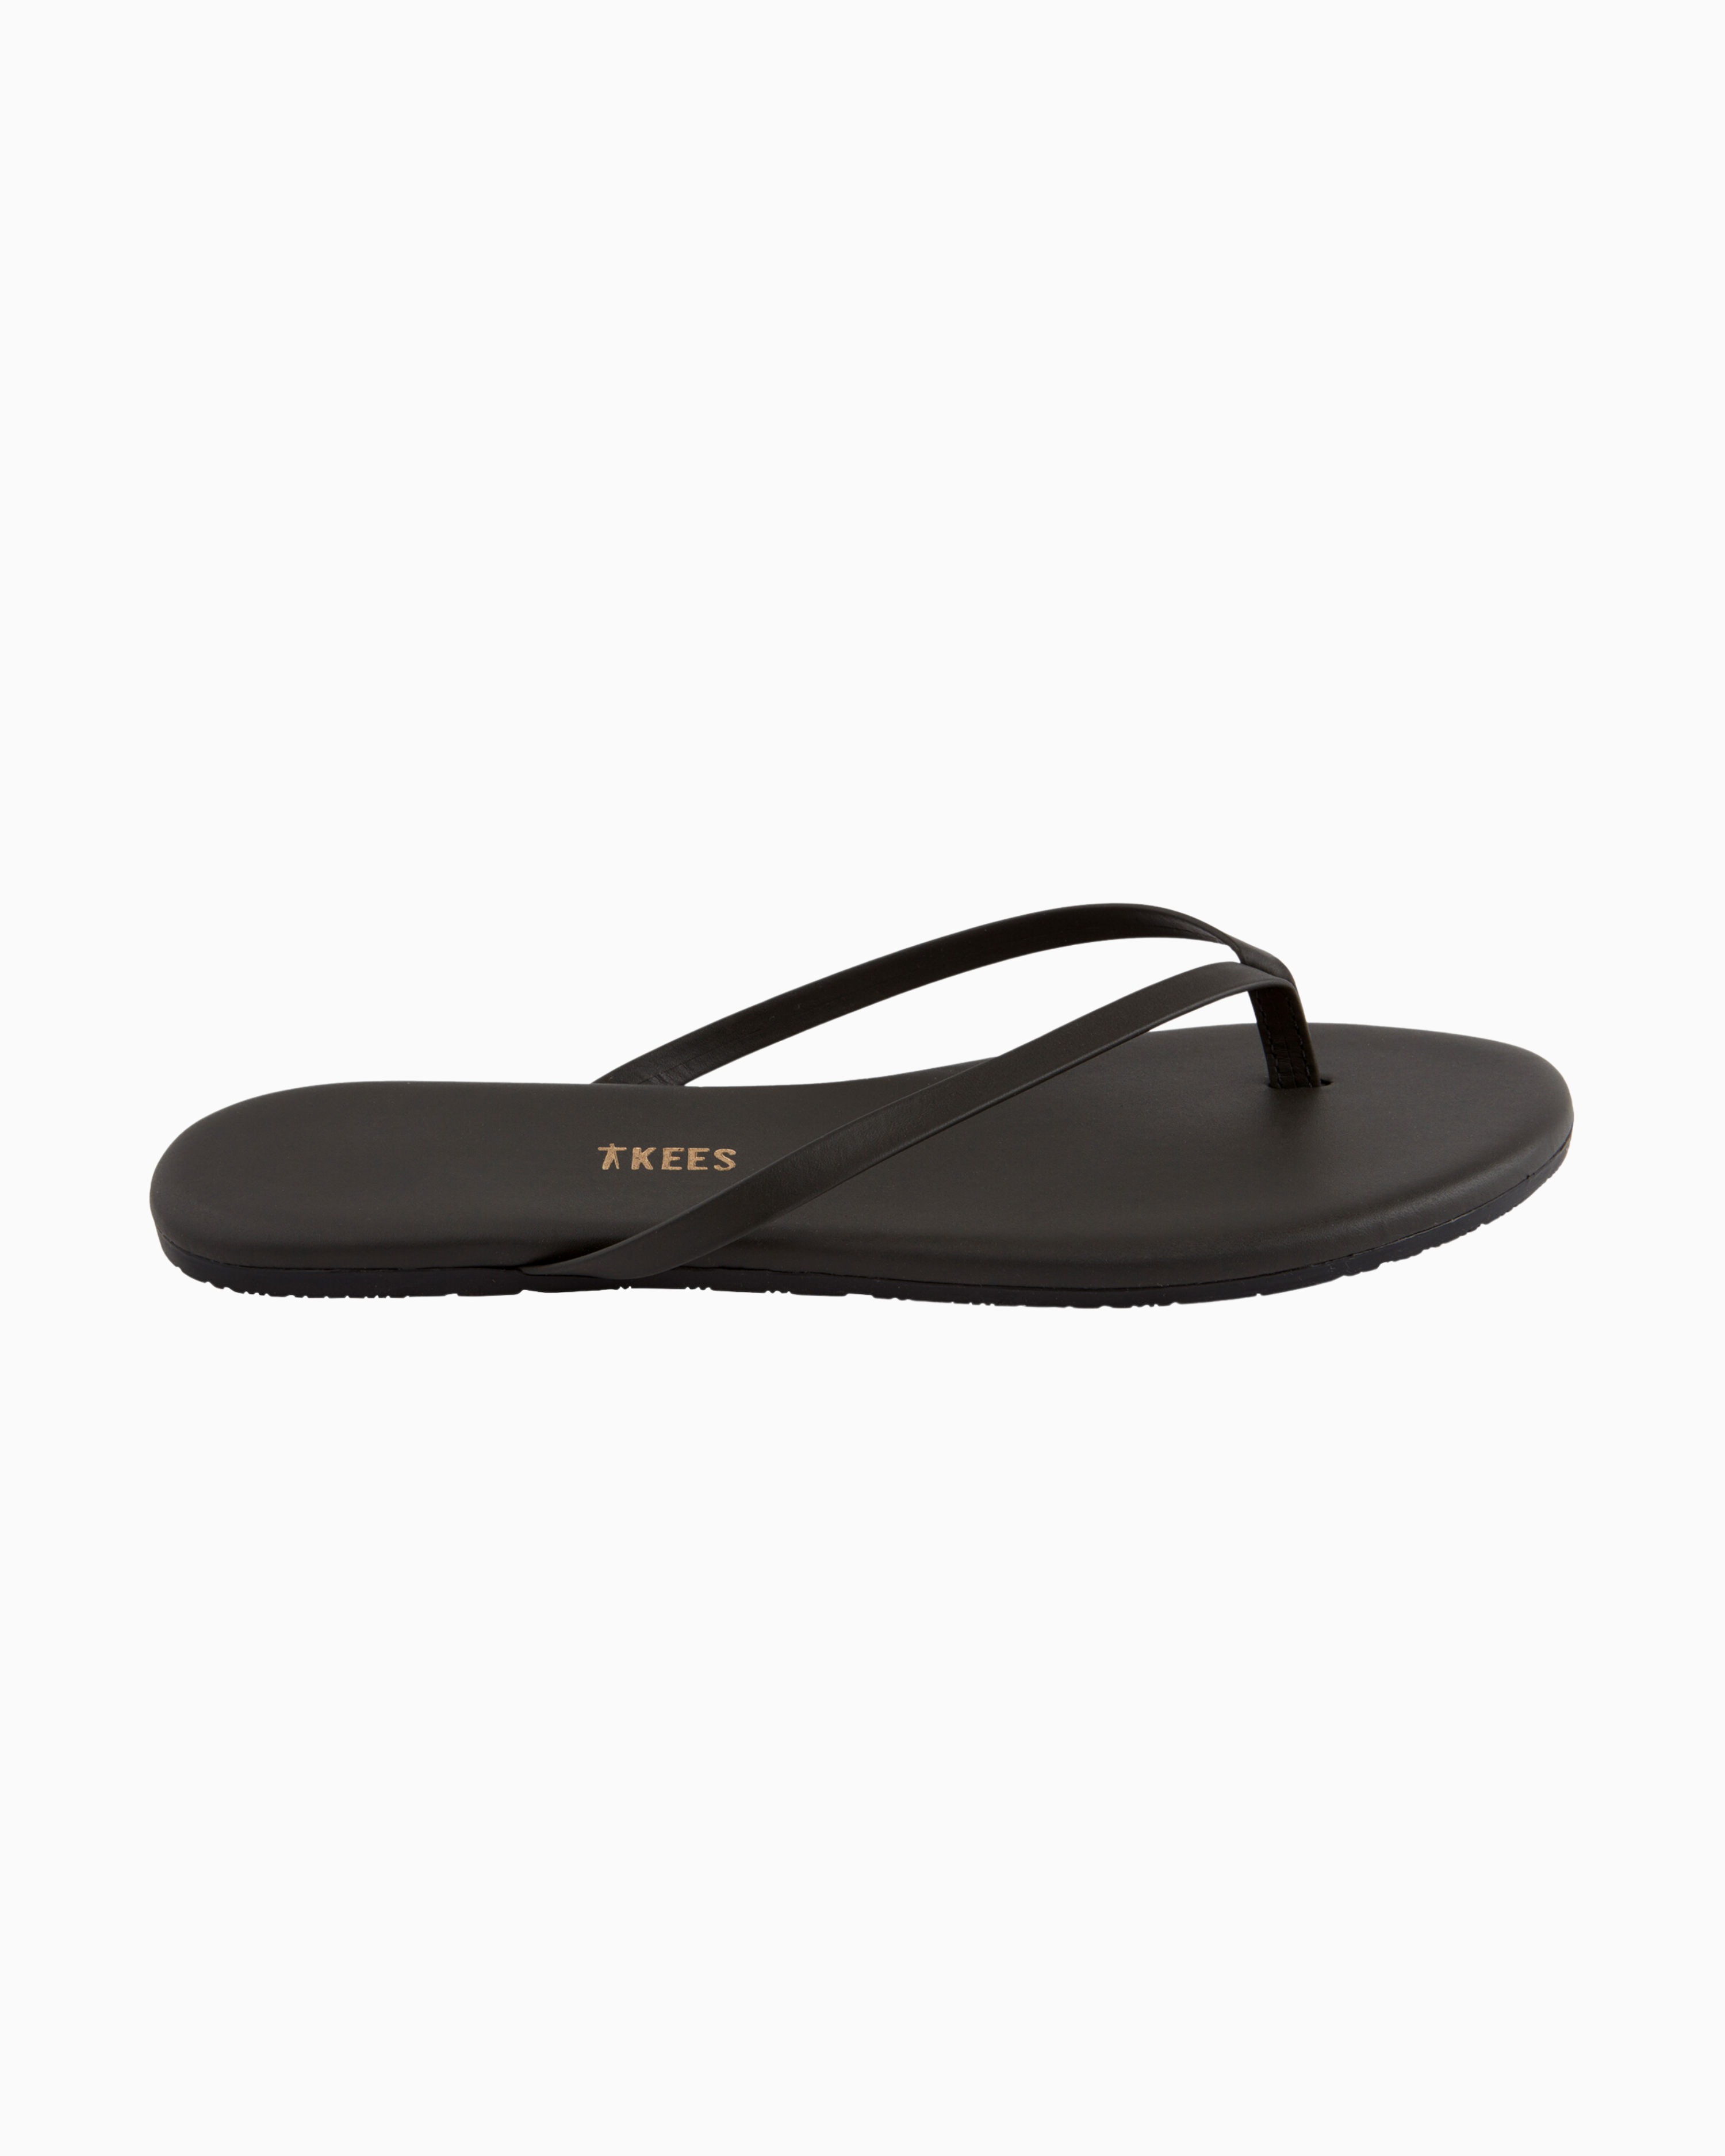 Tkees Solid Sandals in Washed Black